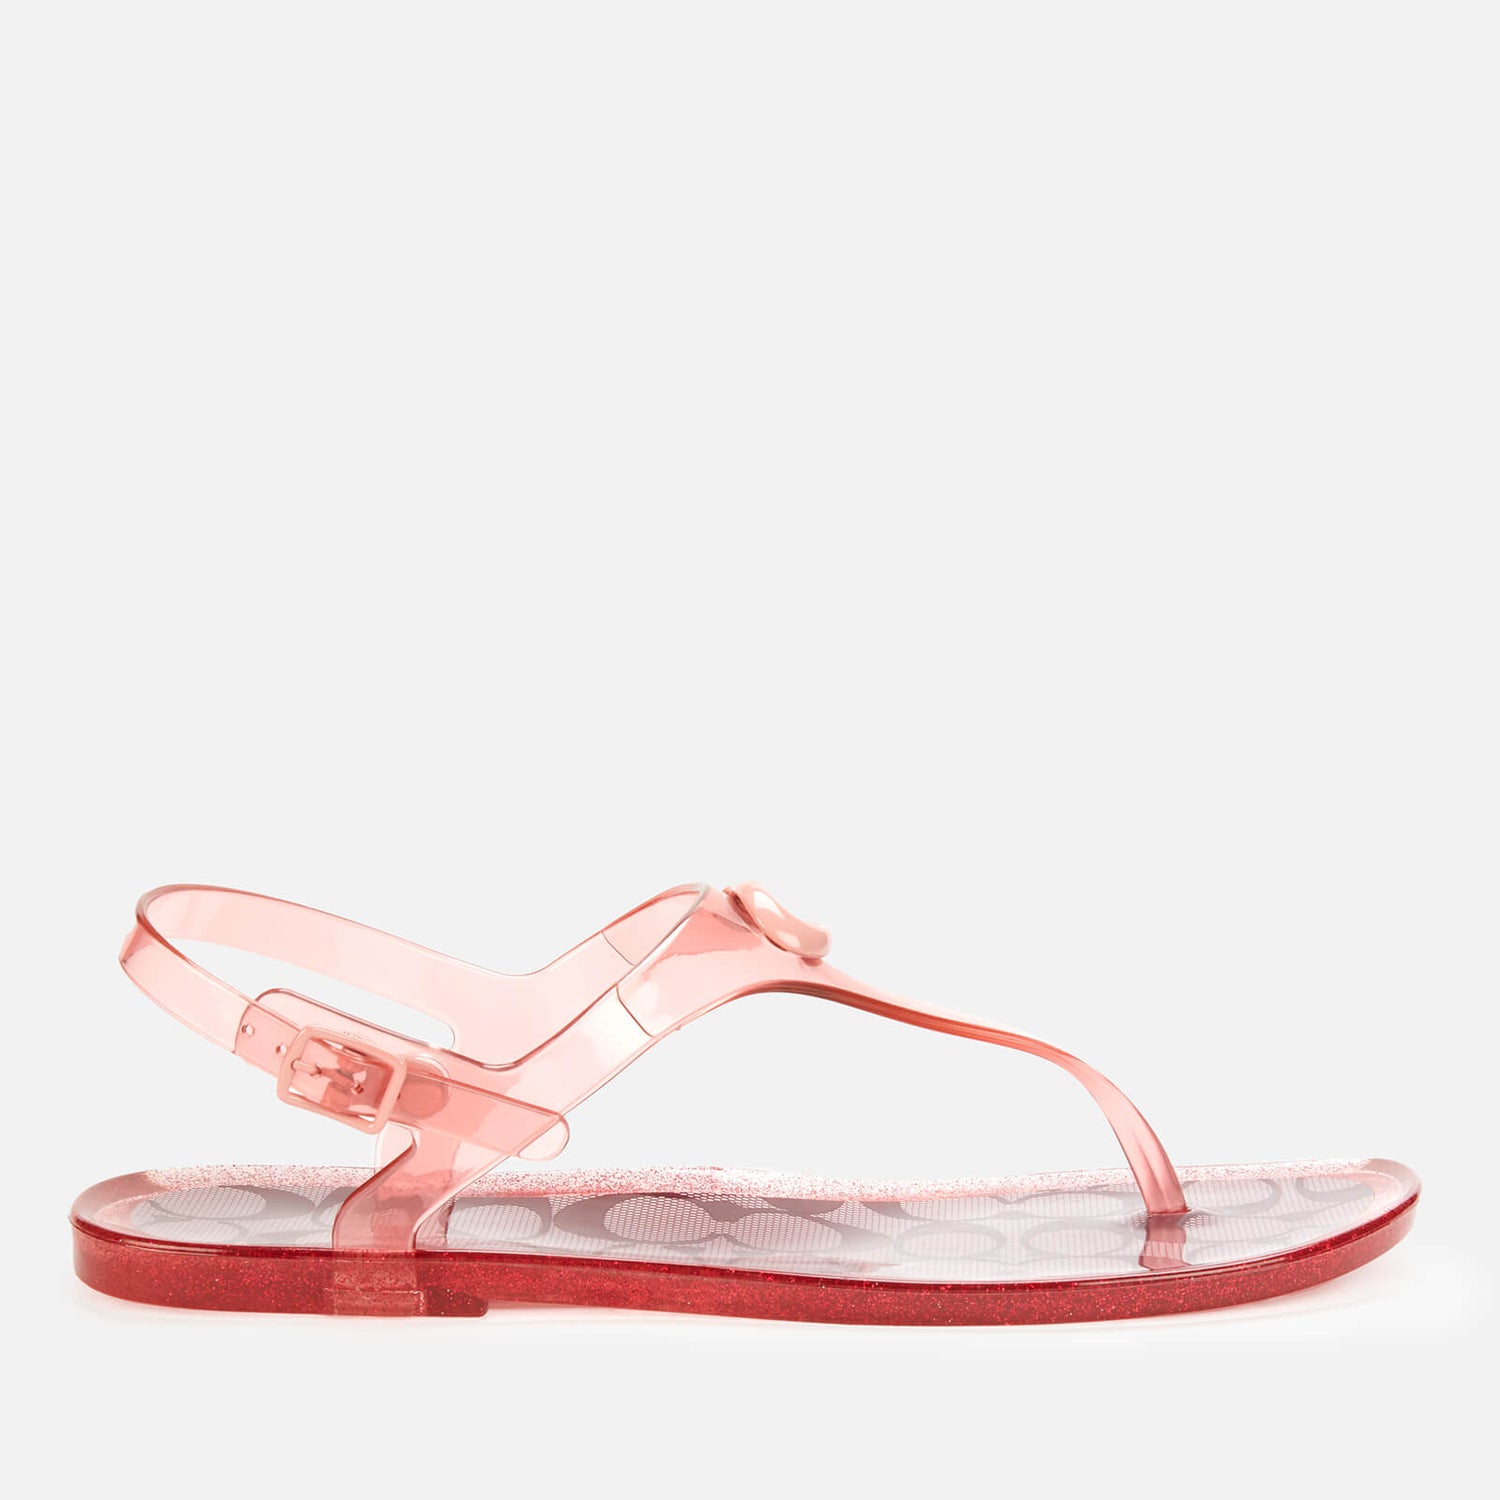 Coach Women's Natalee Rubber Jelly Sandals - Candy Apple/Candy Pink - UK 3